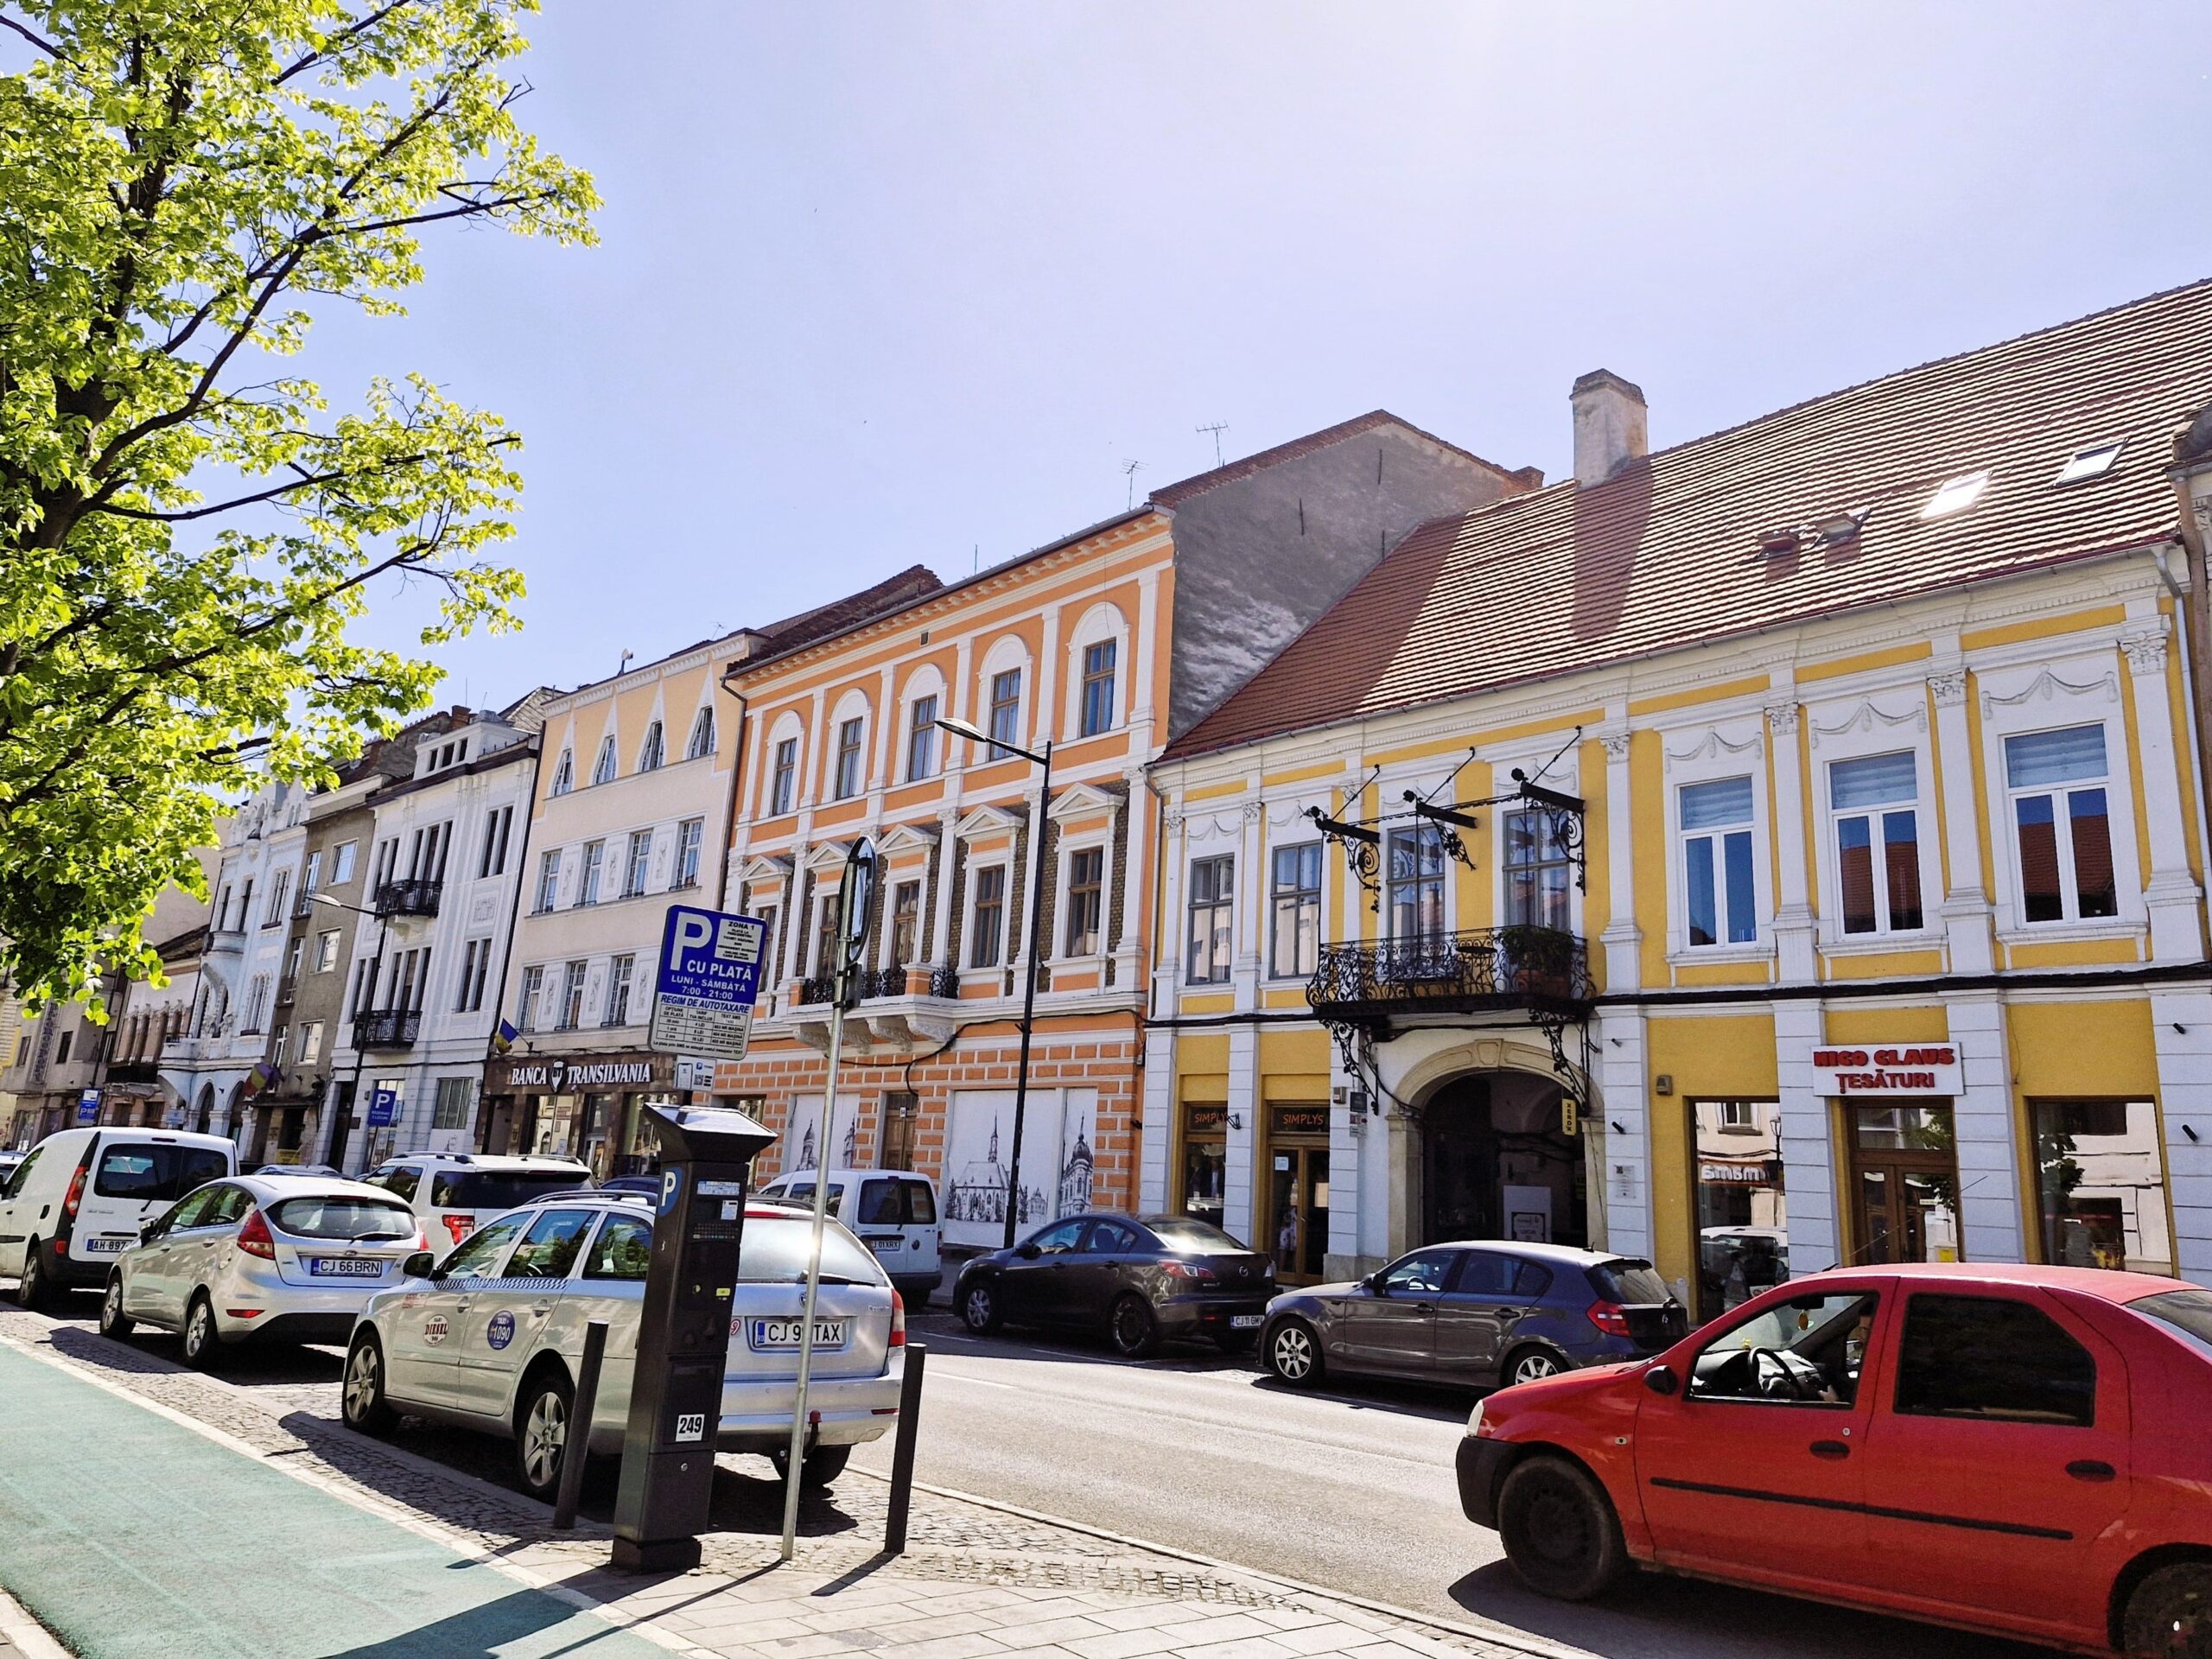 An orange building next to an orange buidling in Cluj-Napoca- both provide a bright pop of colour against the tarmac of the road.